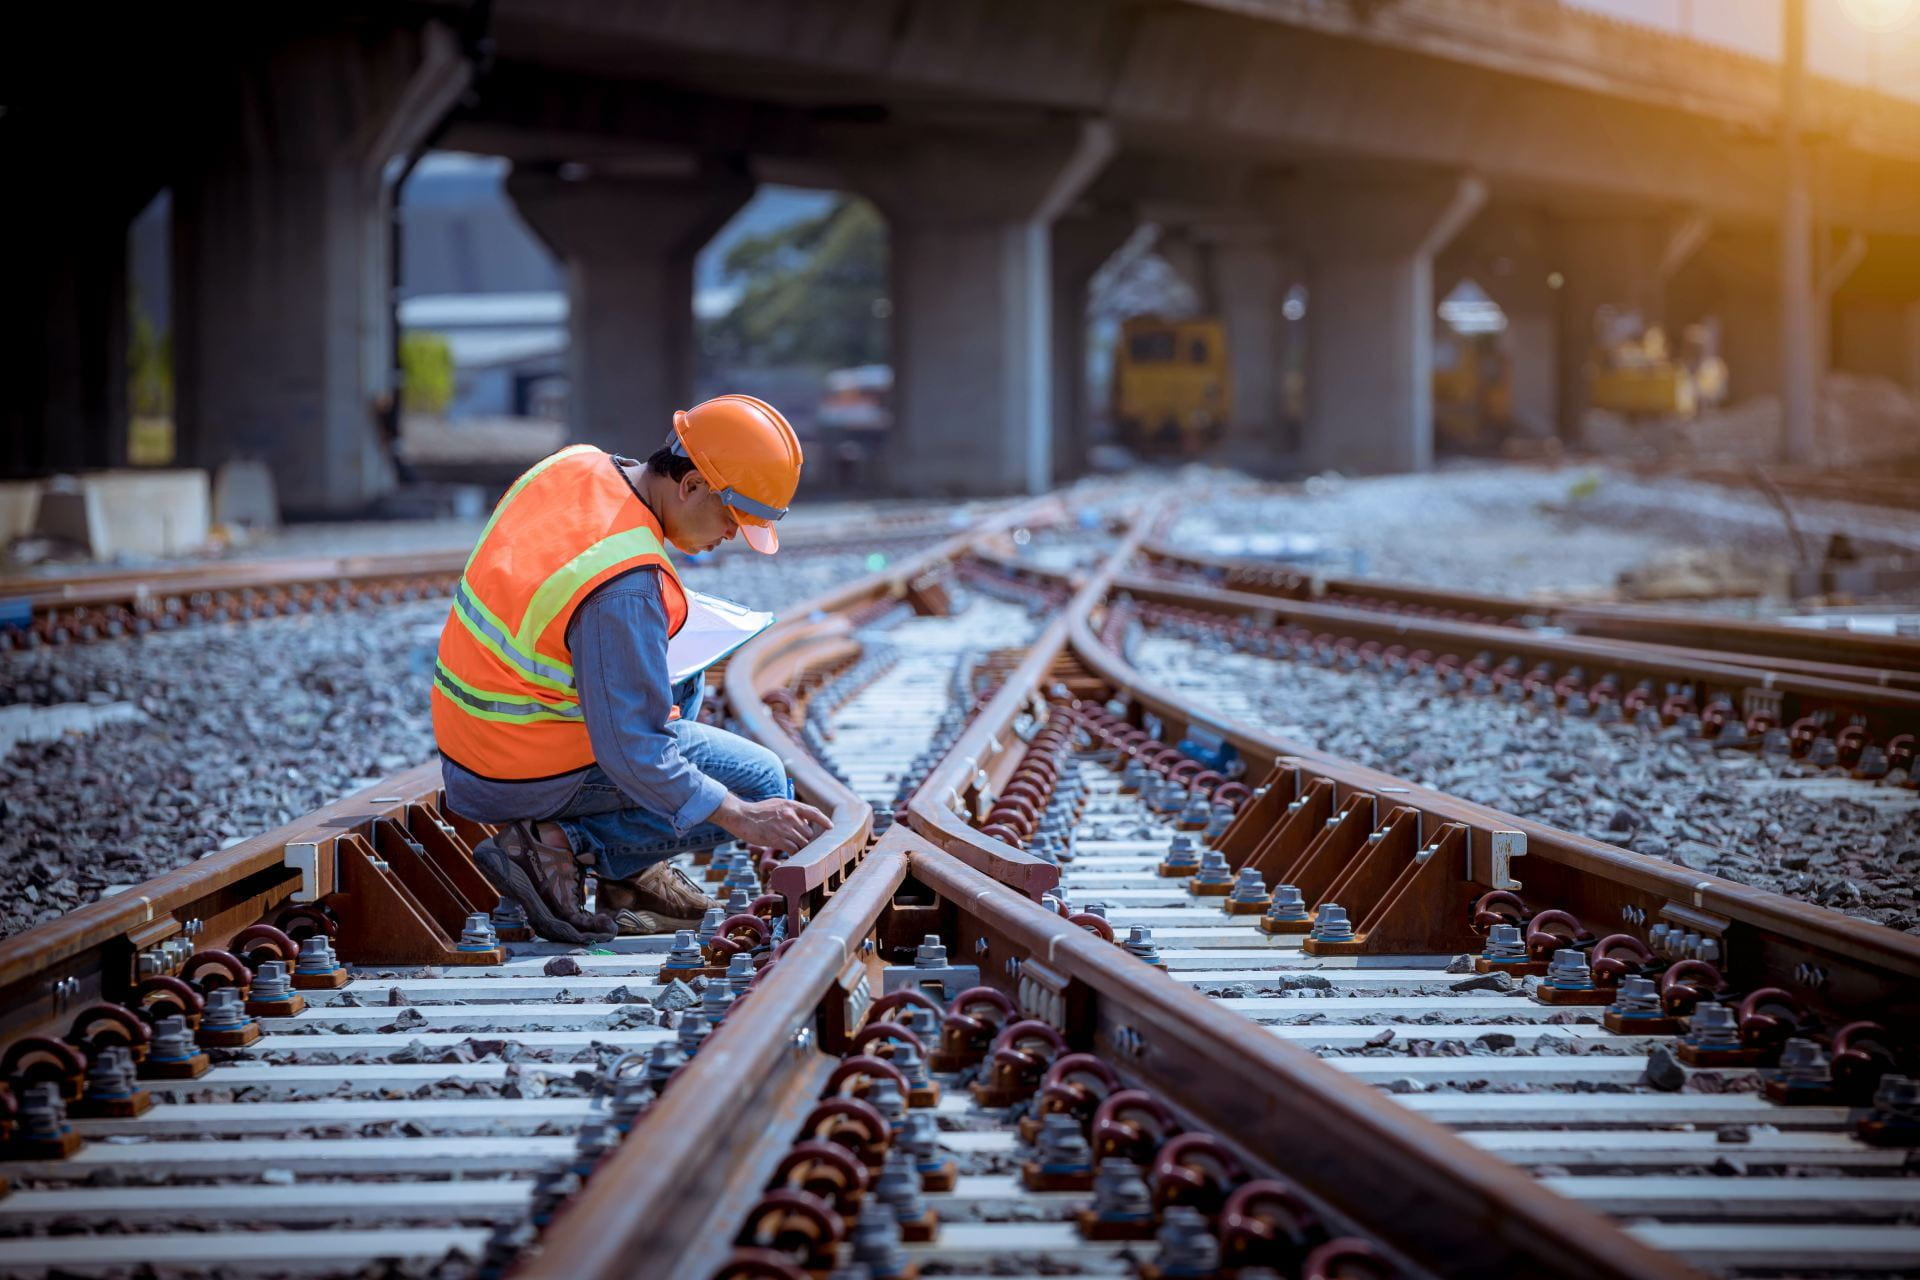 A railroad worker crouches over to inspect railroad tracks.